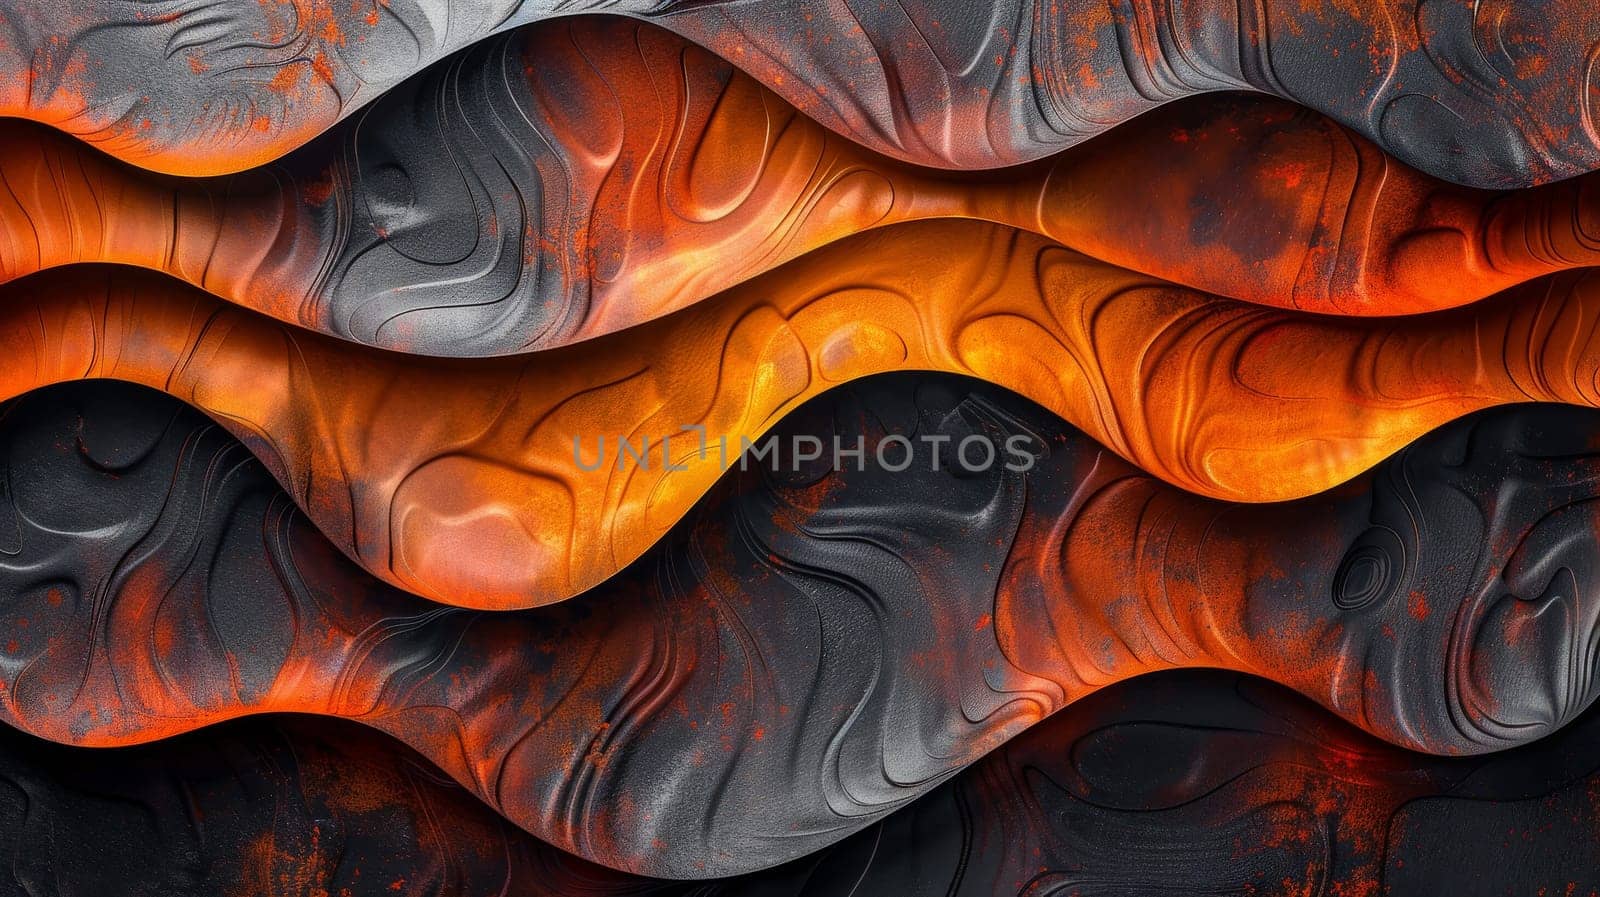 A series of orange and black waves with a fiery orange background by itchaznong